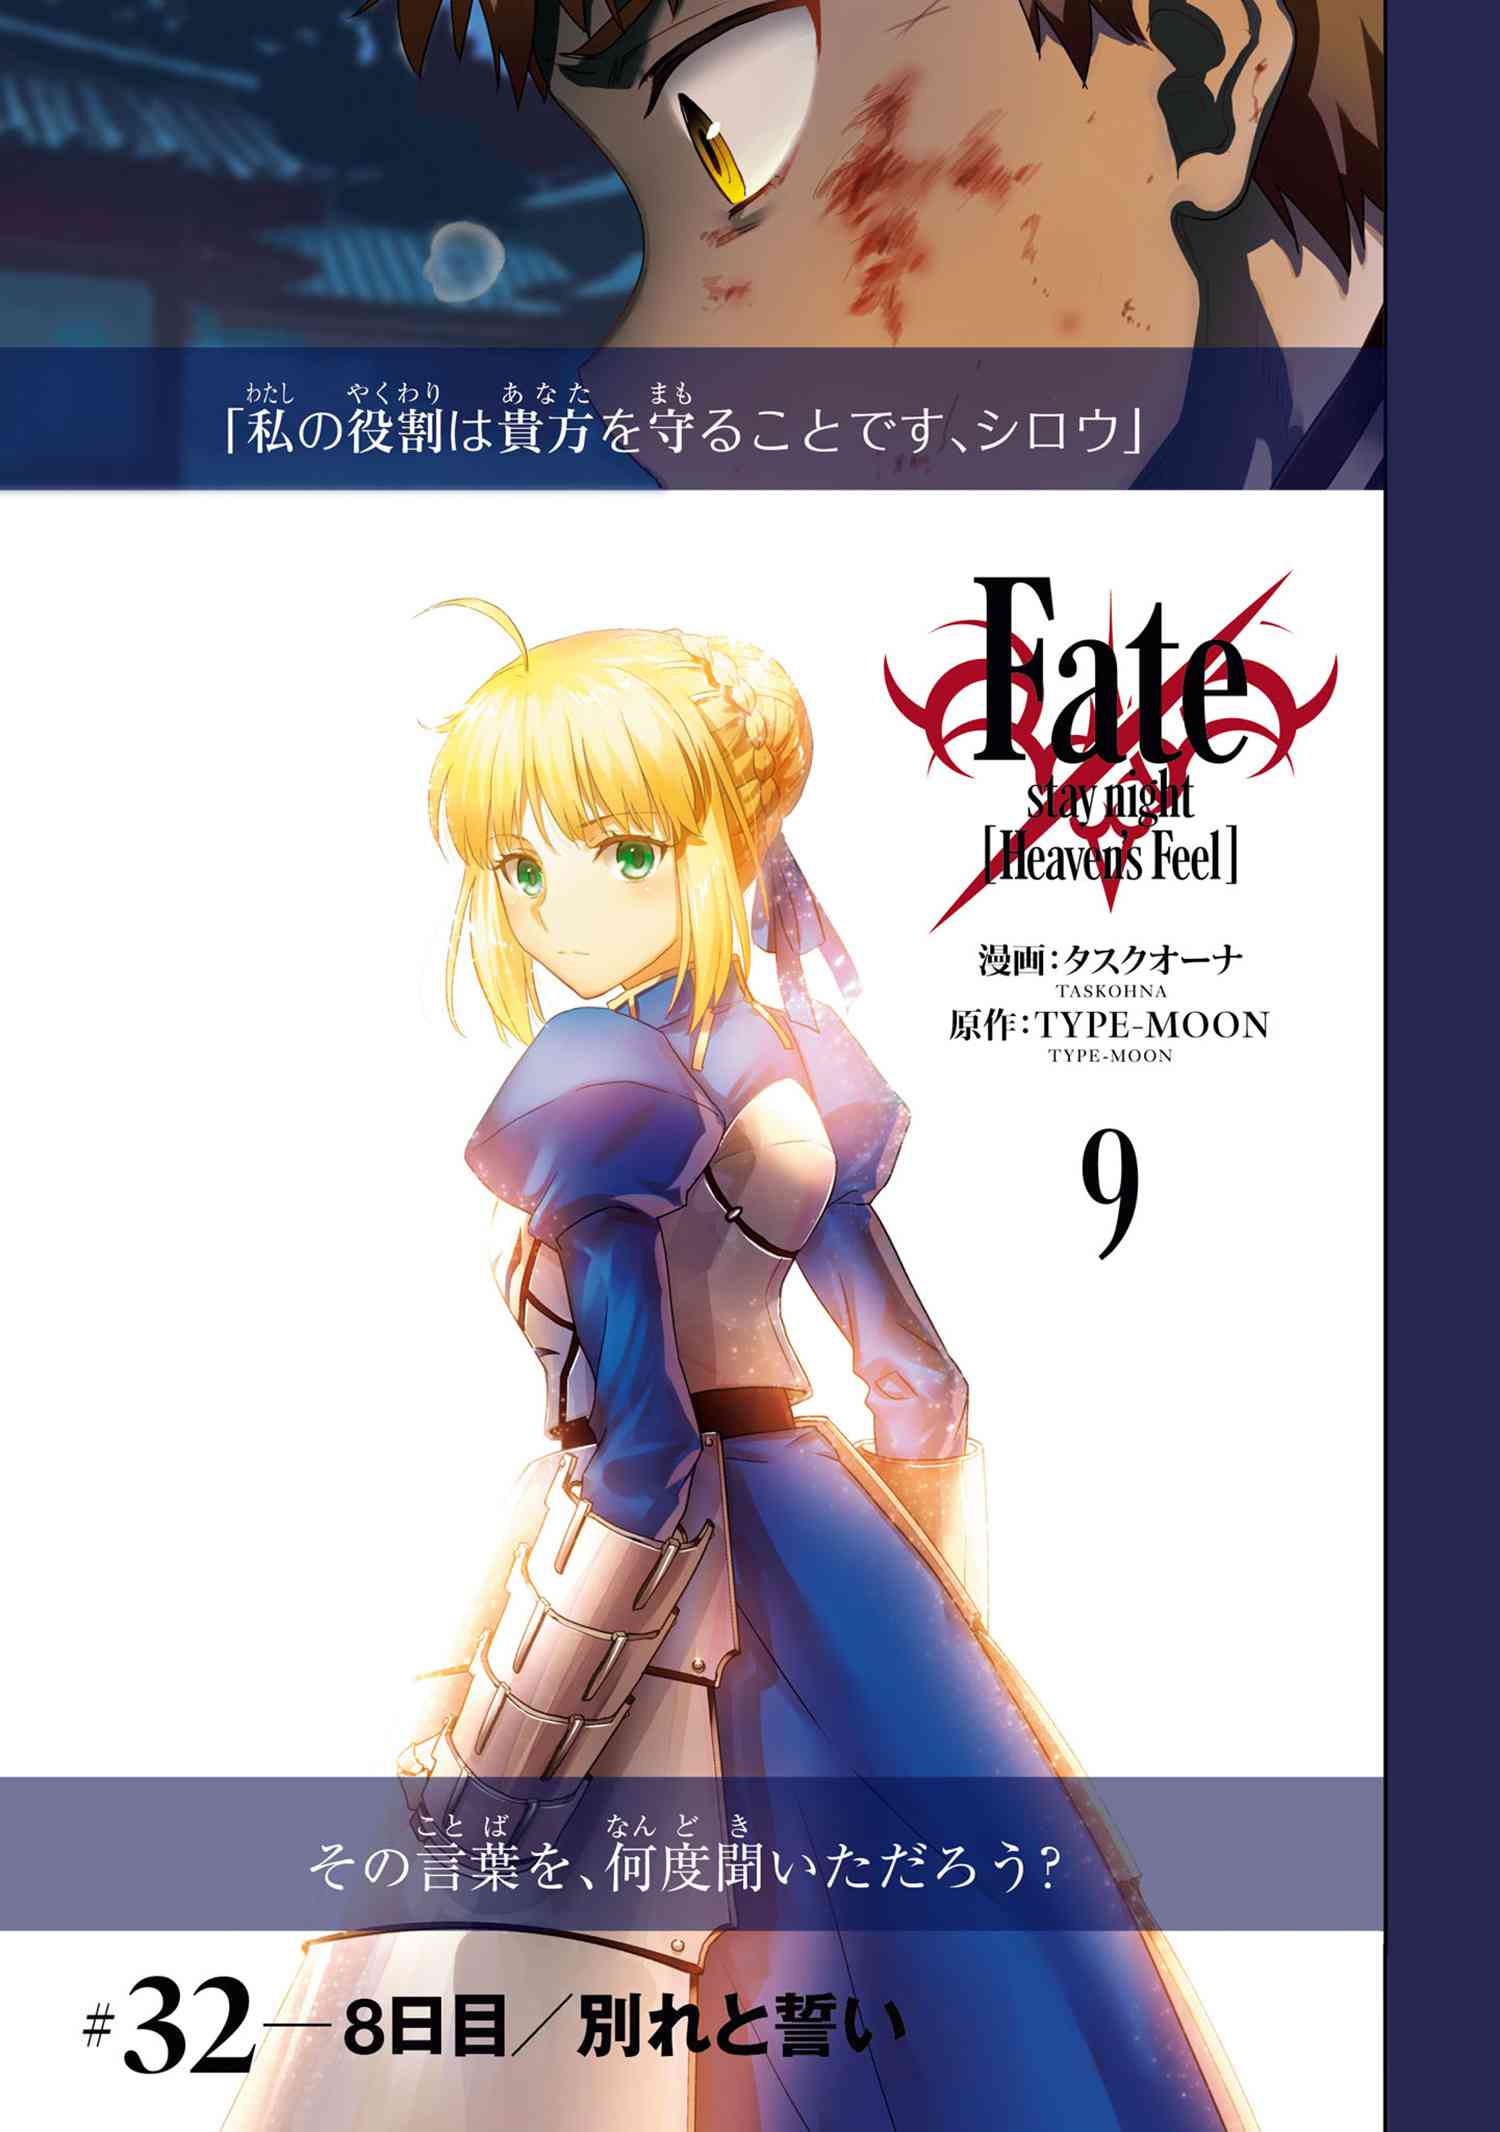 32-1]Fate/stay night [Heaven's Feel] - タスクオーナ / TYPE-MOON｜TYPE-MOONコミックエース